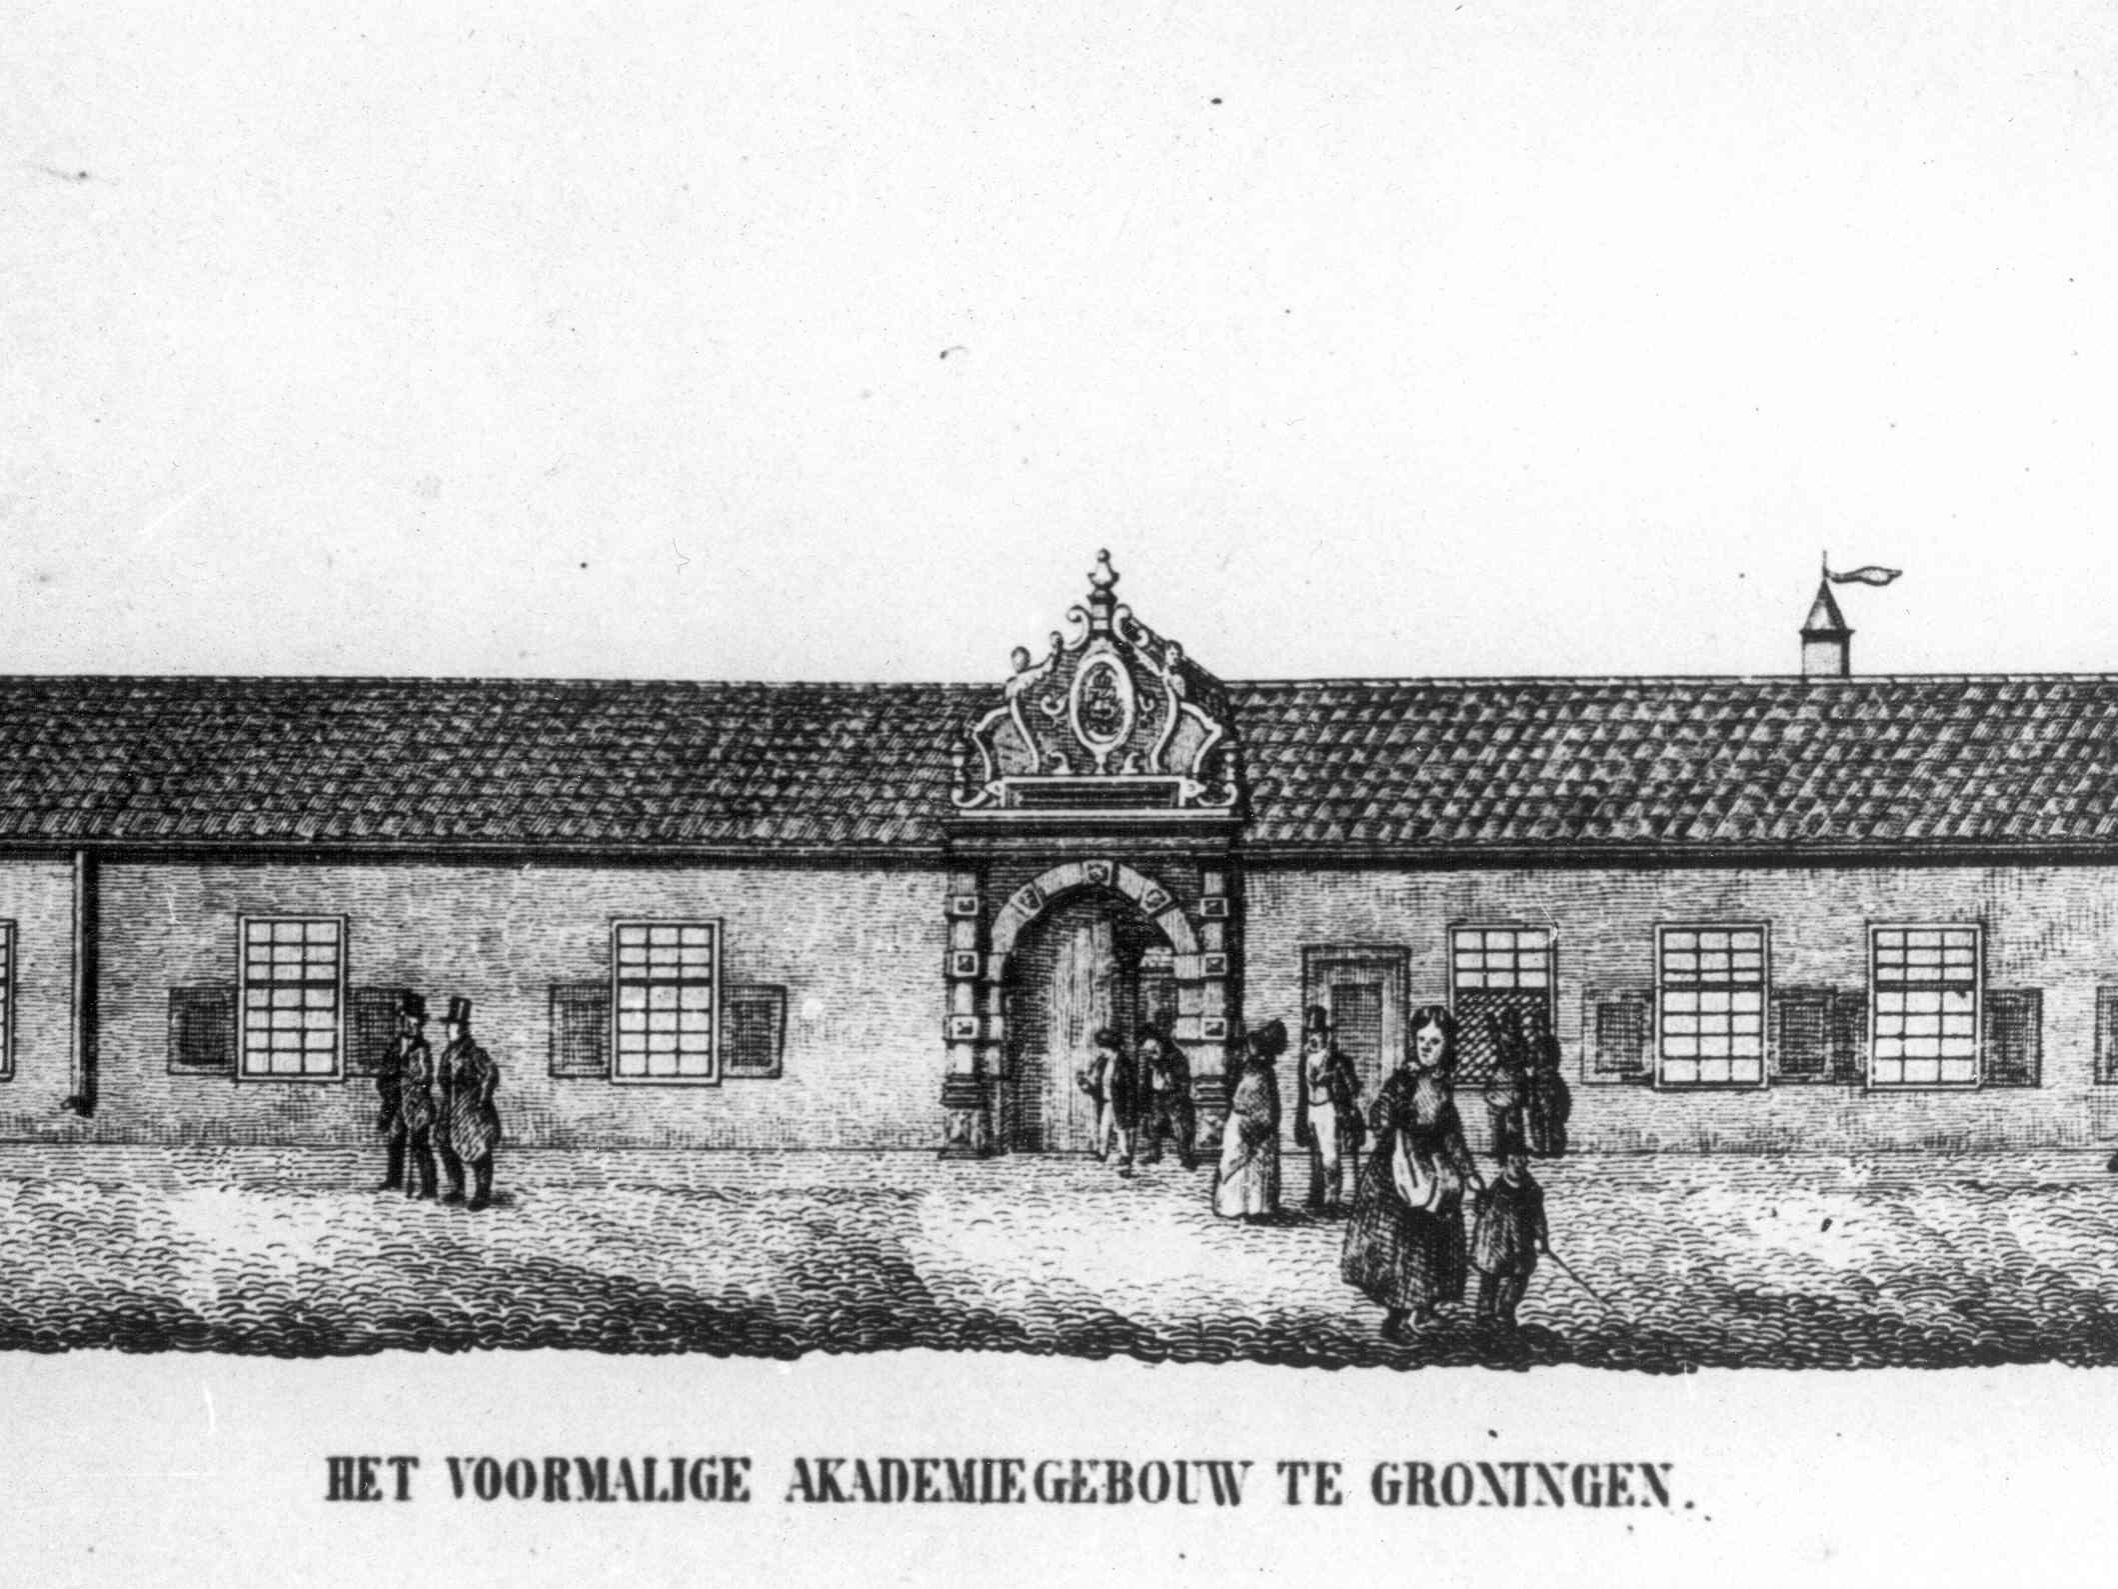 The Academy Building in 1614